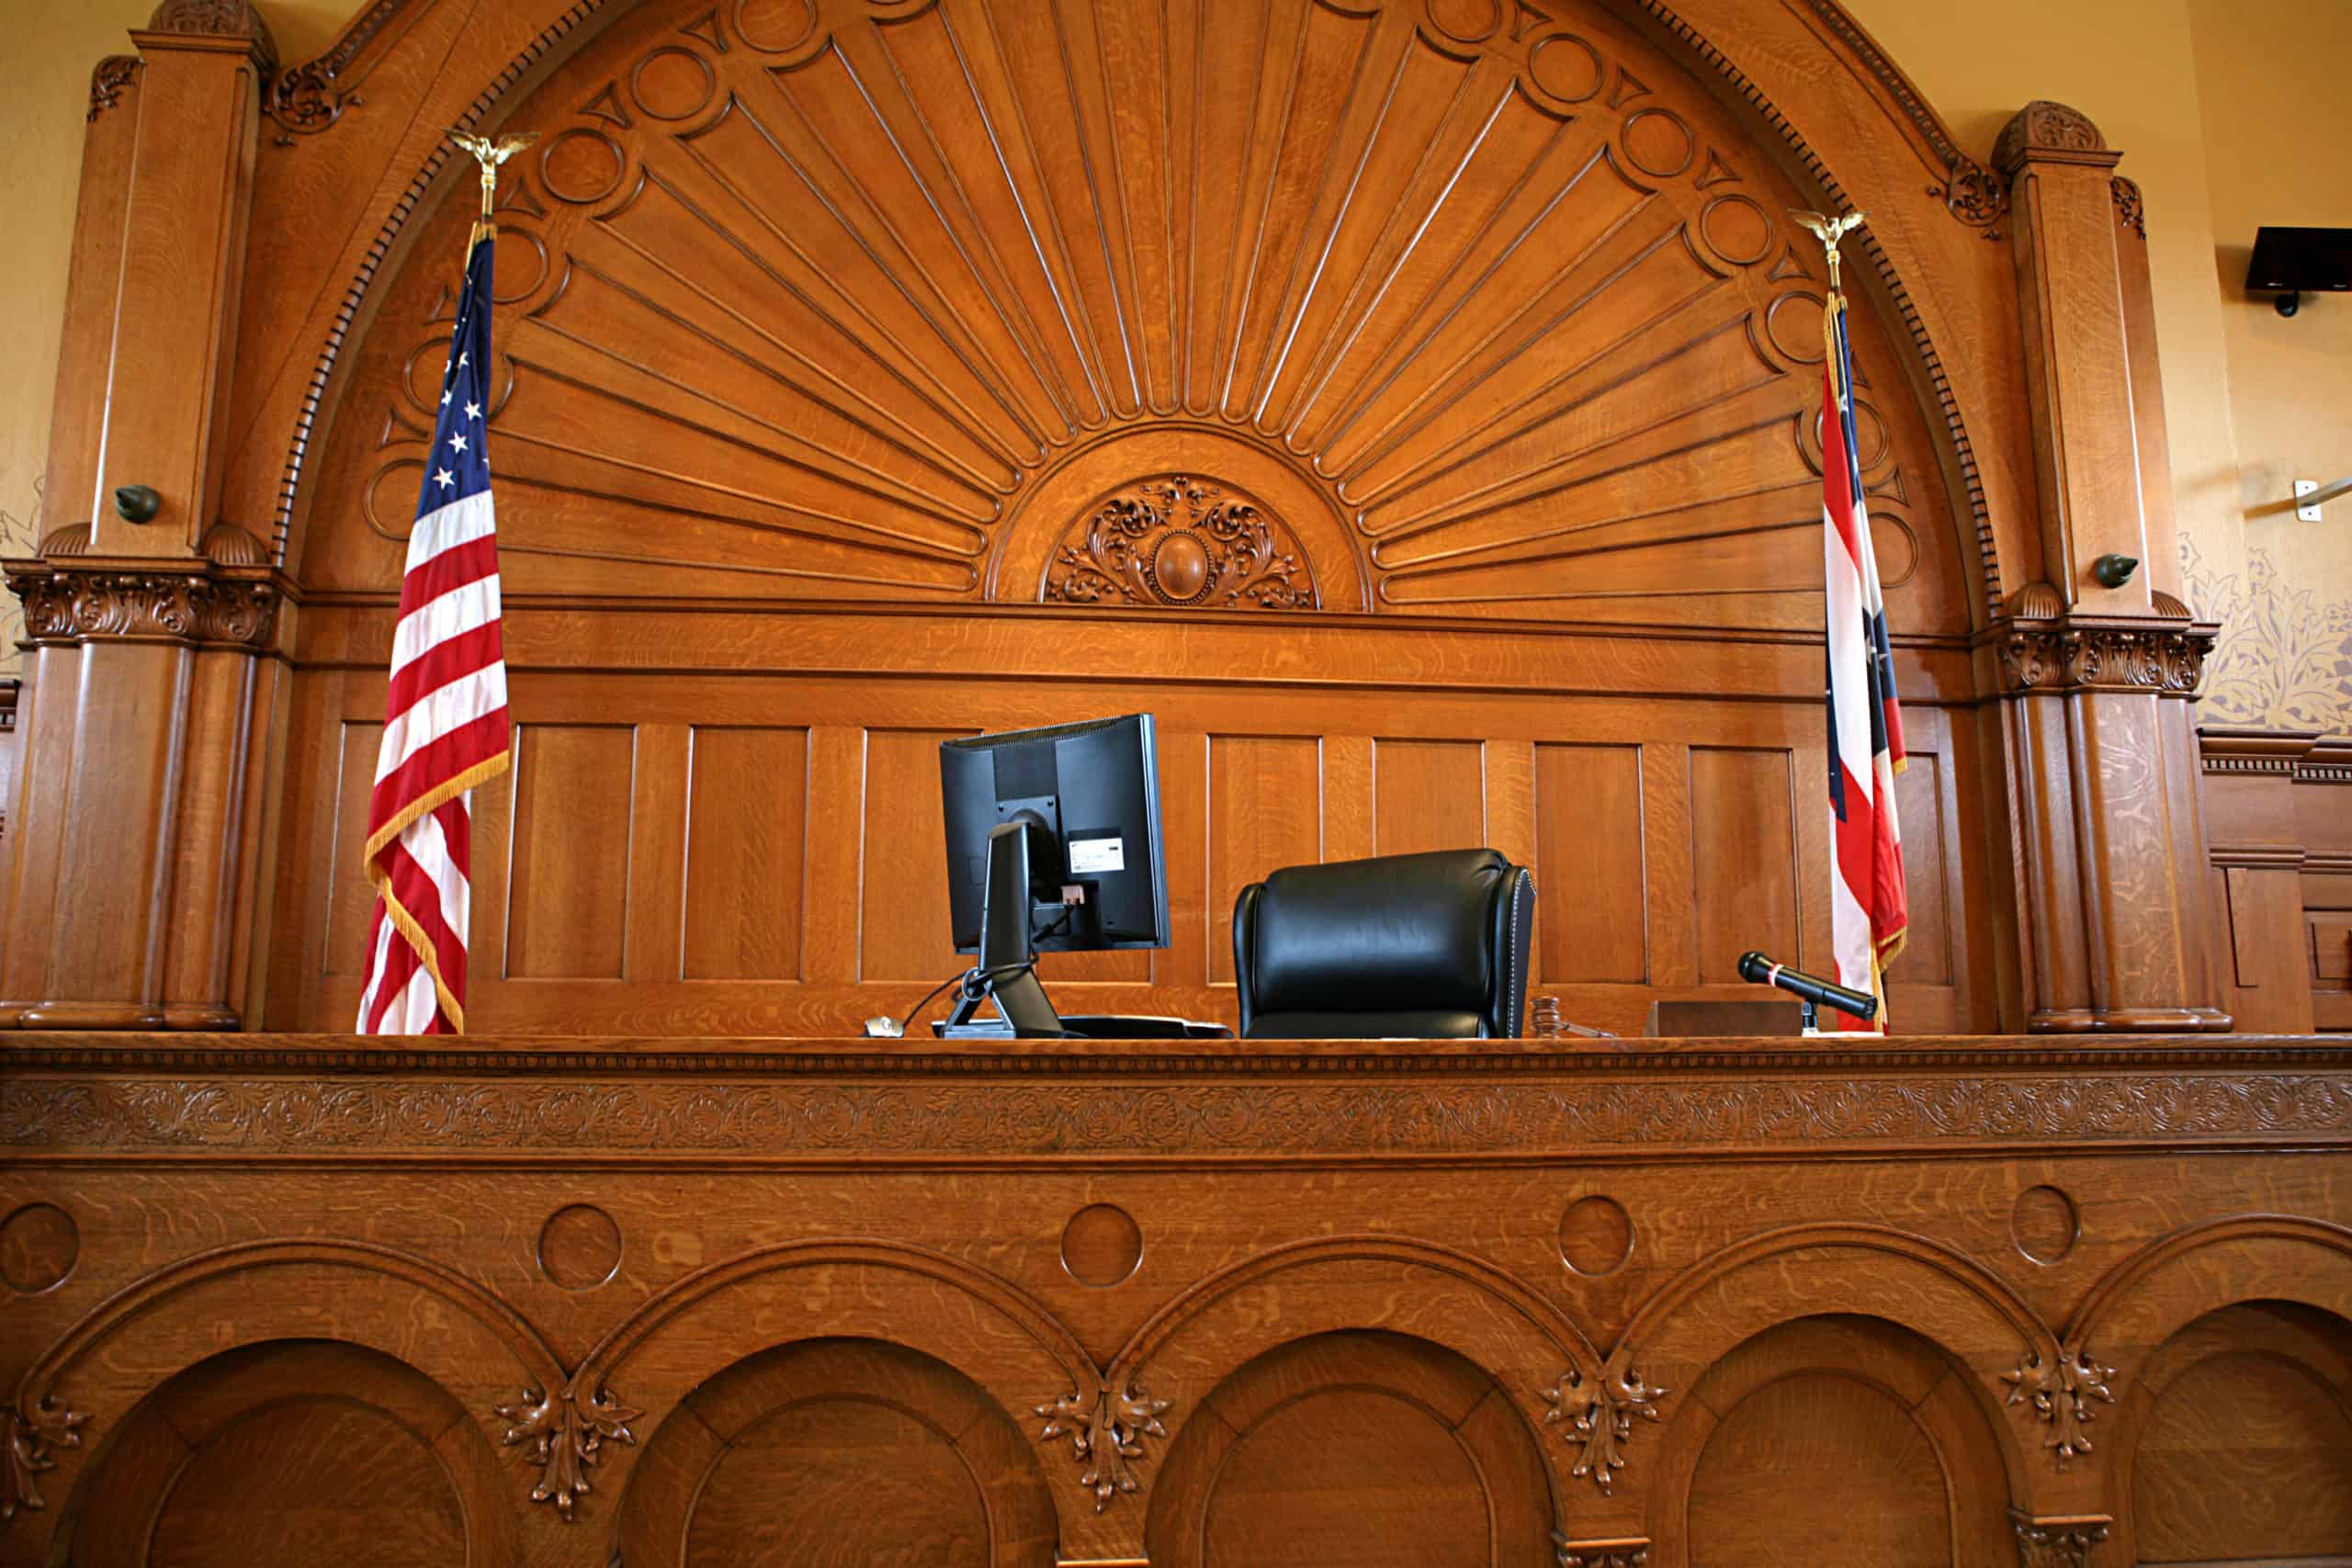 courtroom with AV display